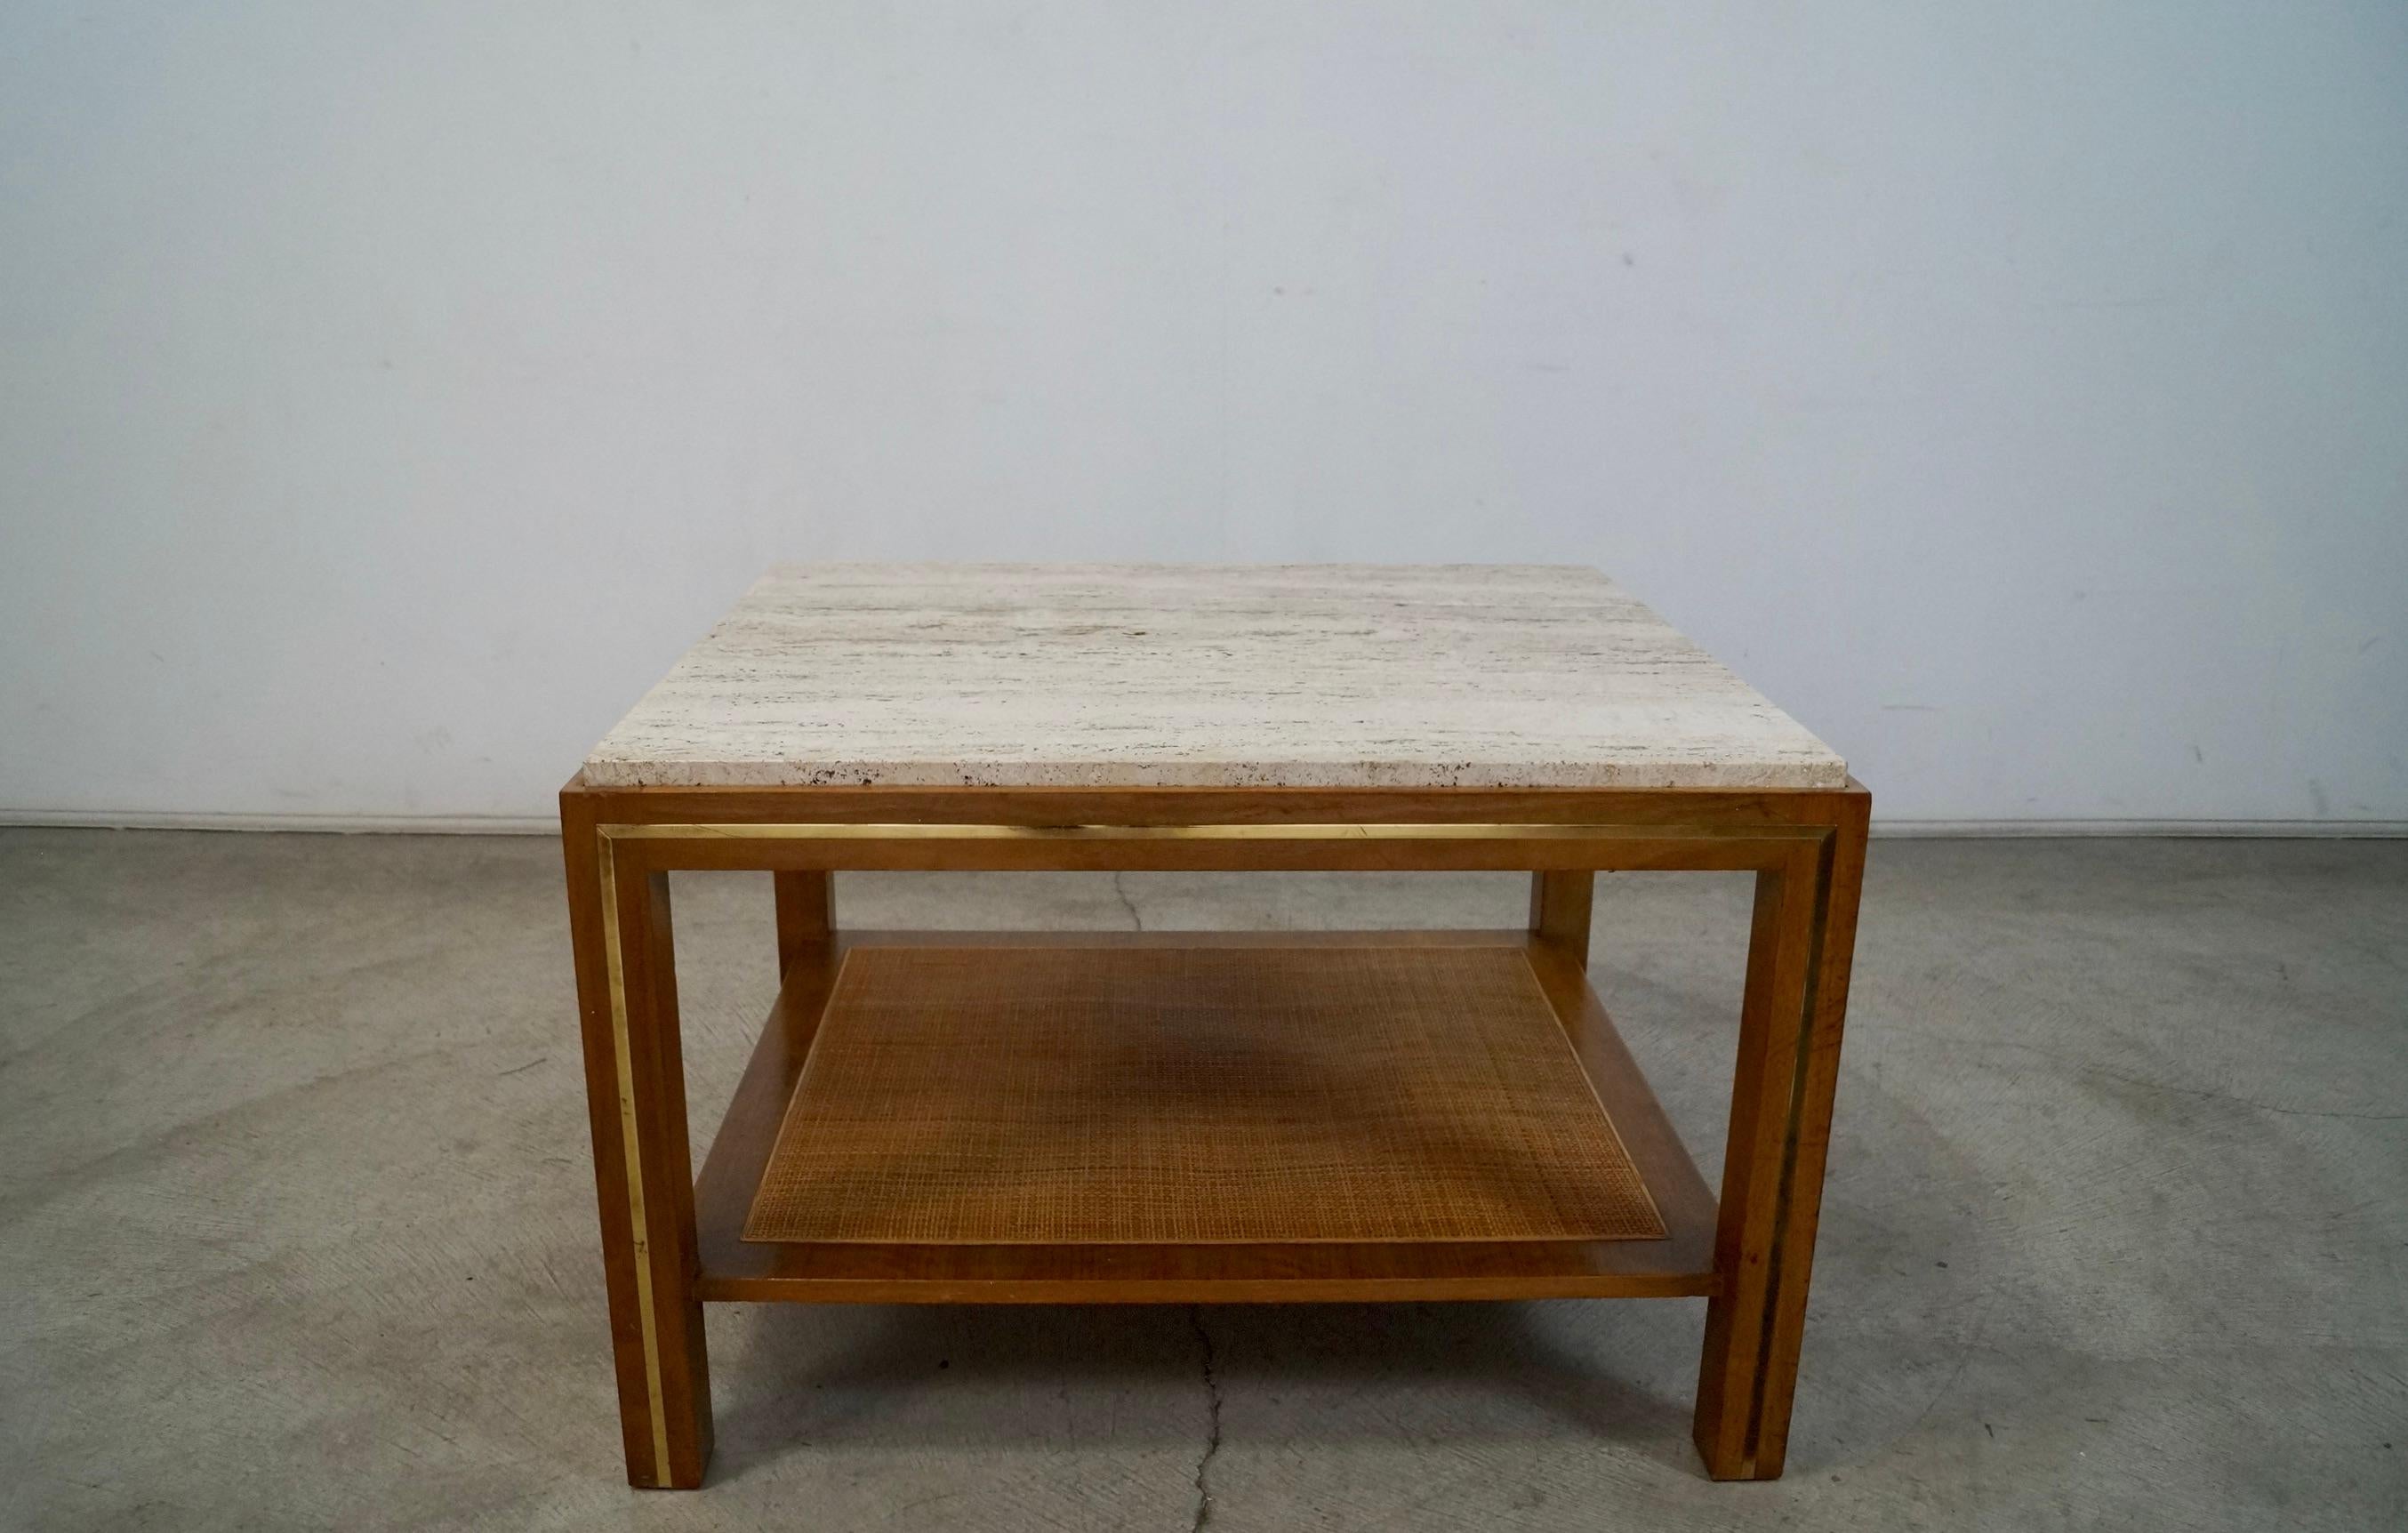 Vintage Mid-century Modern end table for sale. Very solid and well made. Has a travertine insert on the top, and a walnut frame with a brass inlaid in the walnut frame. It has a bottom shelf with caning. It's a beautiful accent table, and can work